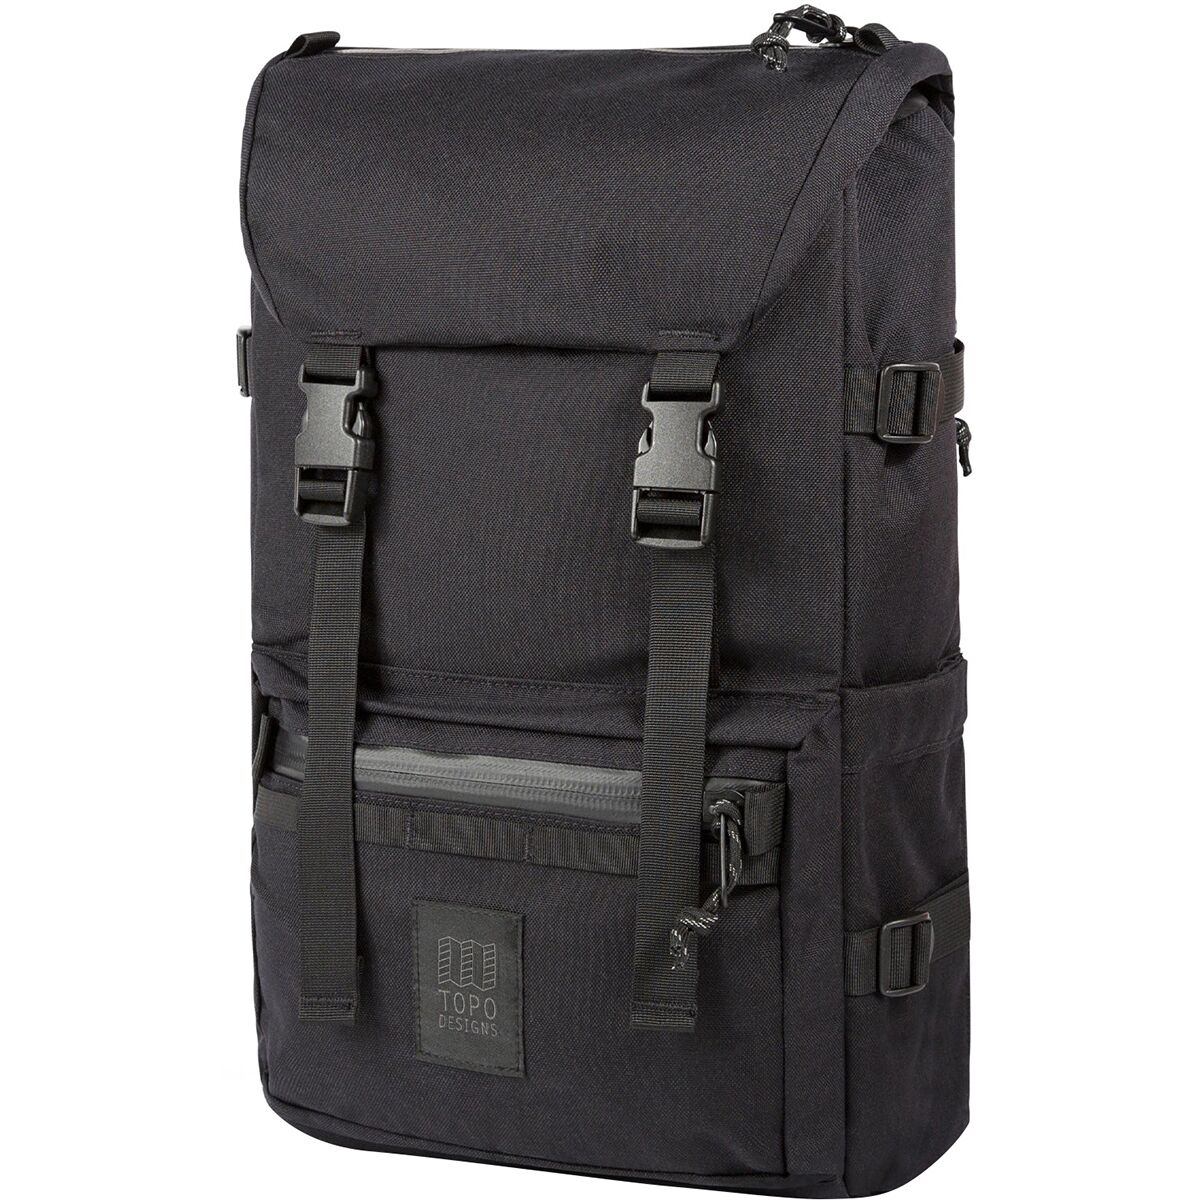 Photos - Backpack Rover 20L Pack - Tech